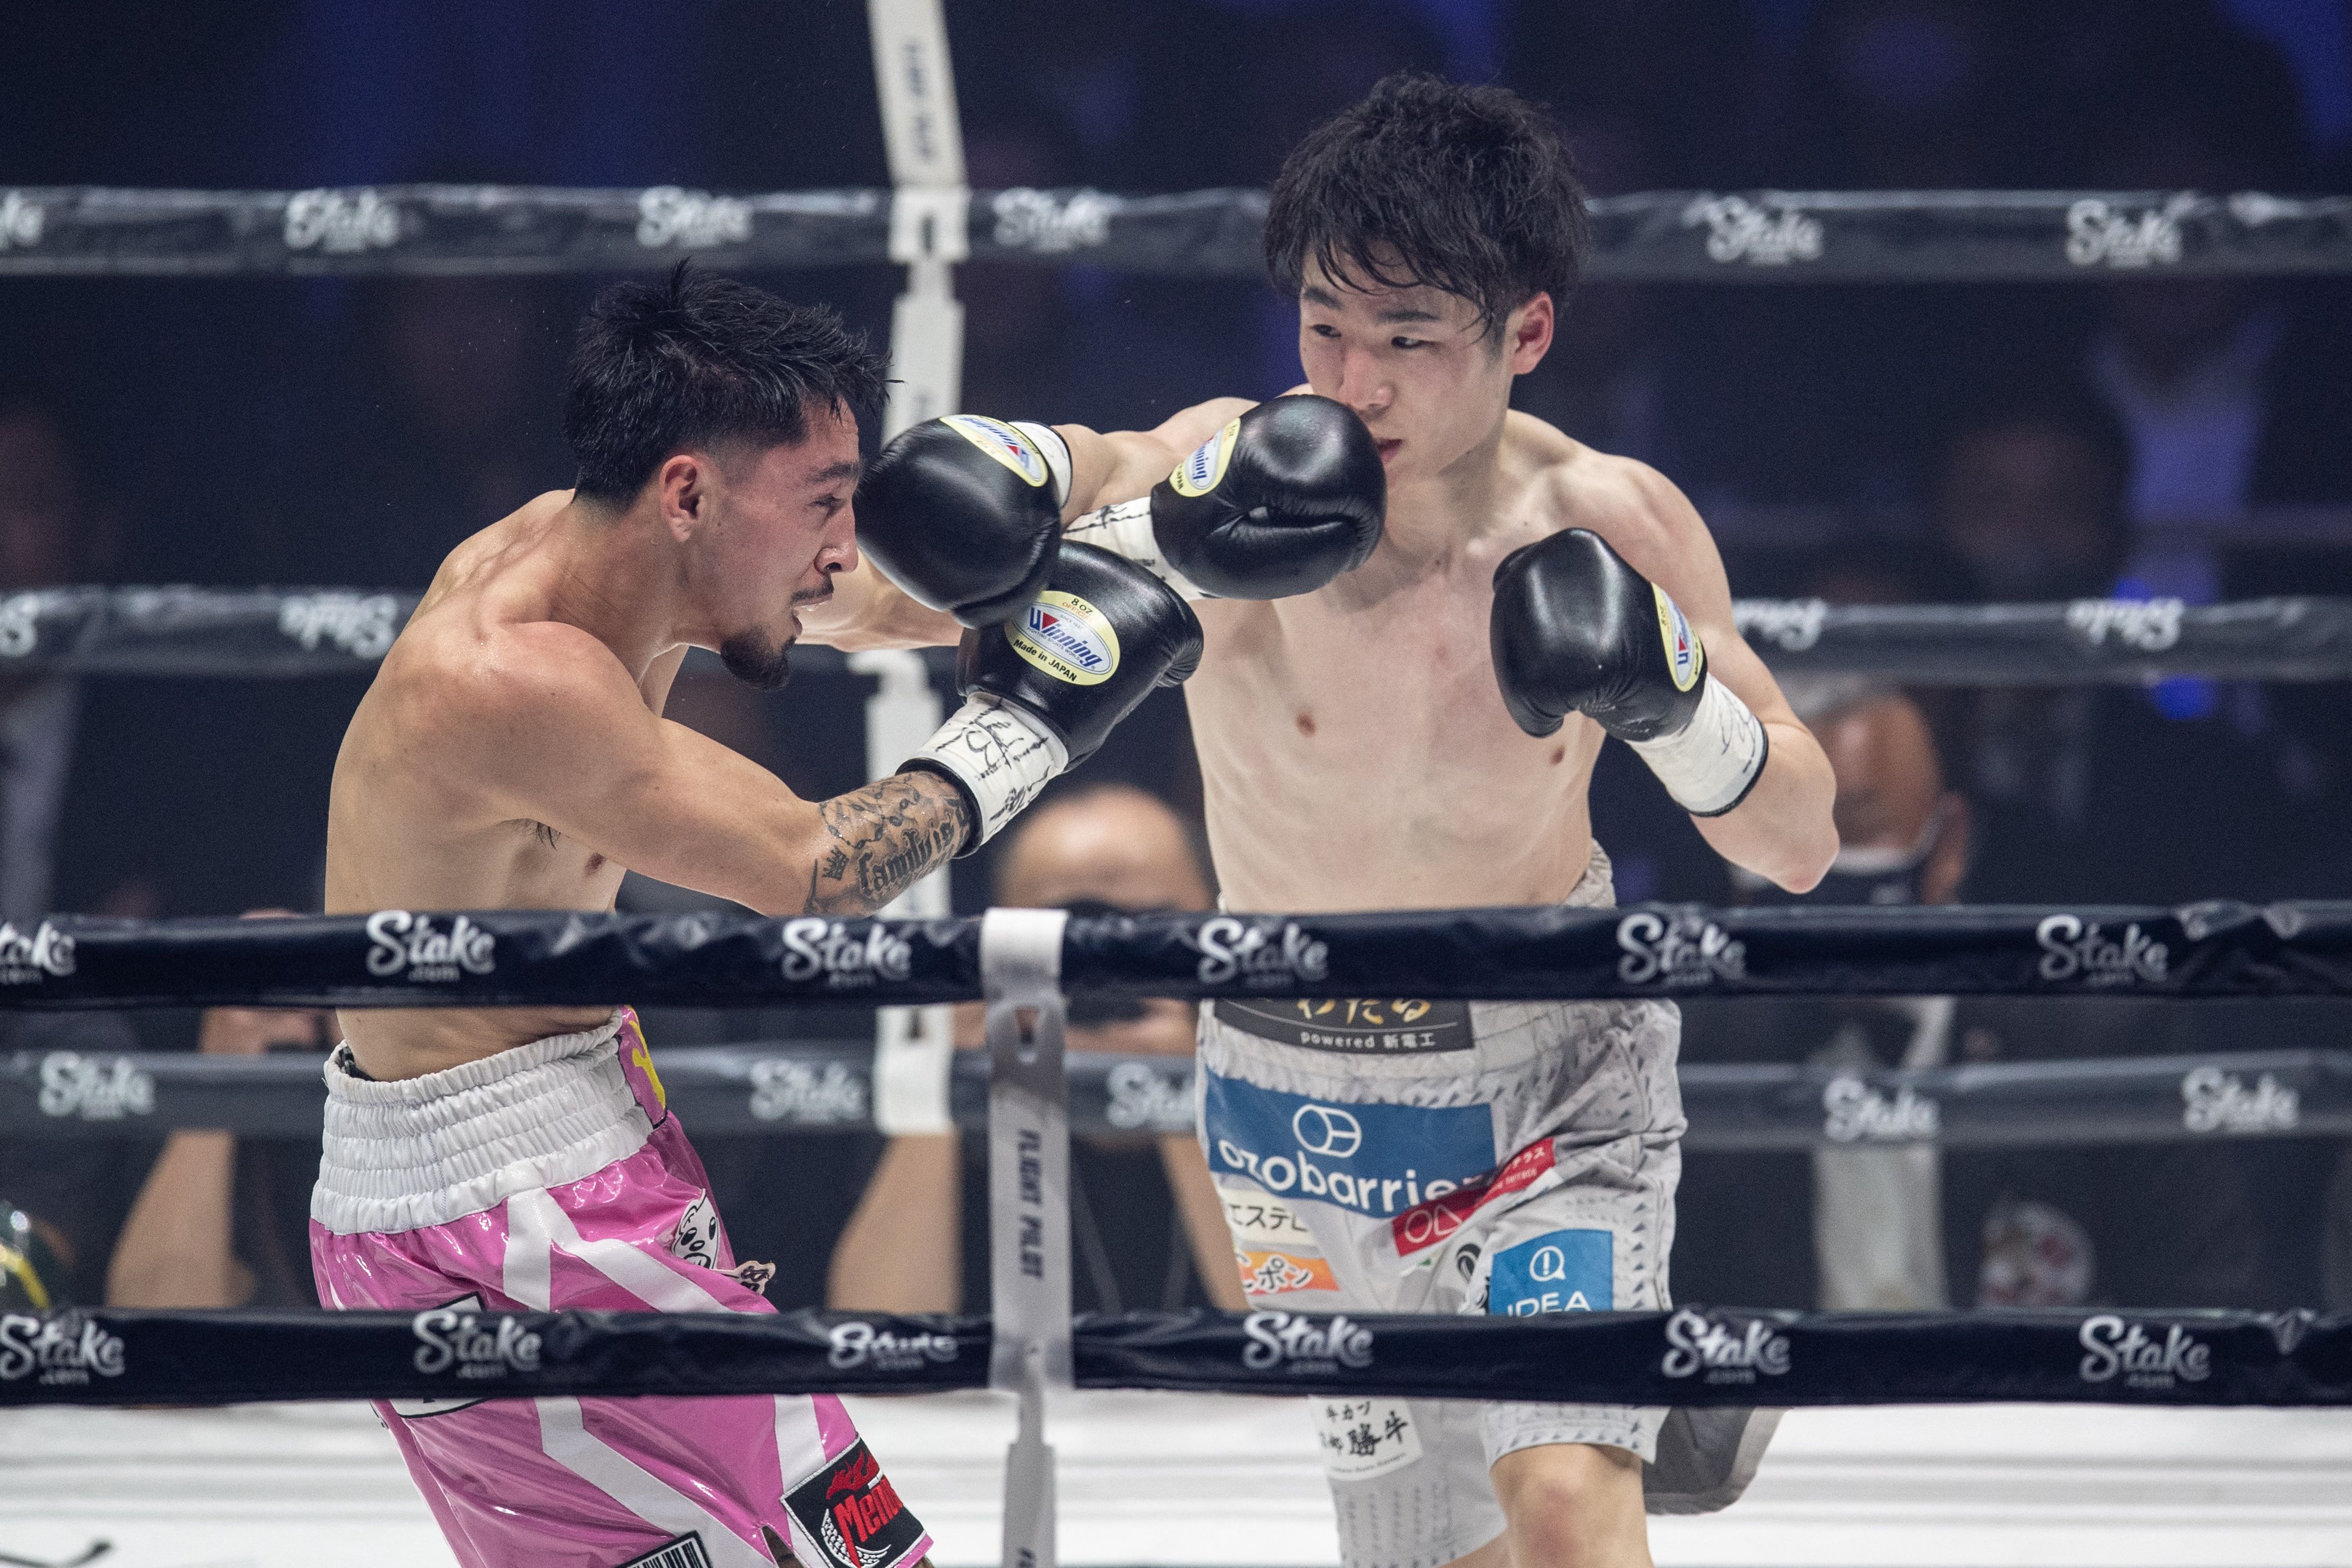 Kenshiro Teraji retained his belts, but had to earn it against Anthony Olascuaga